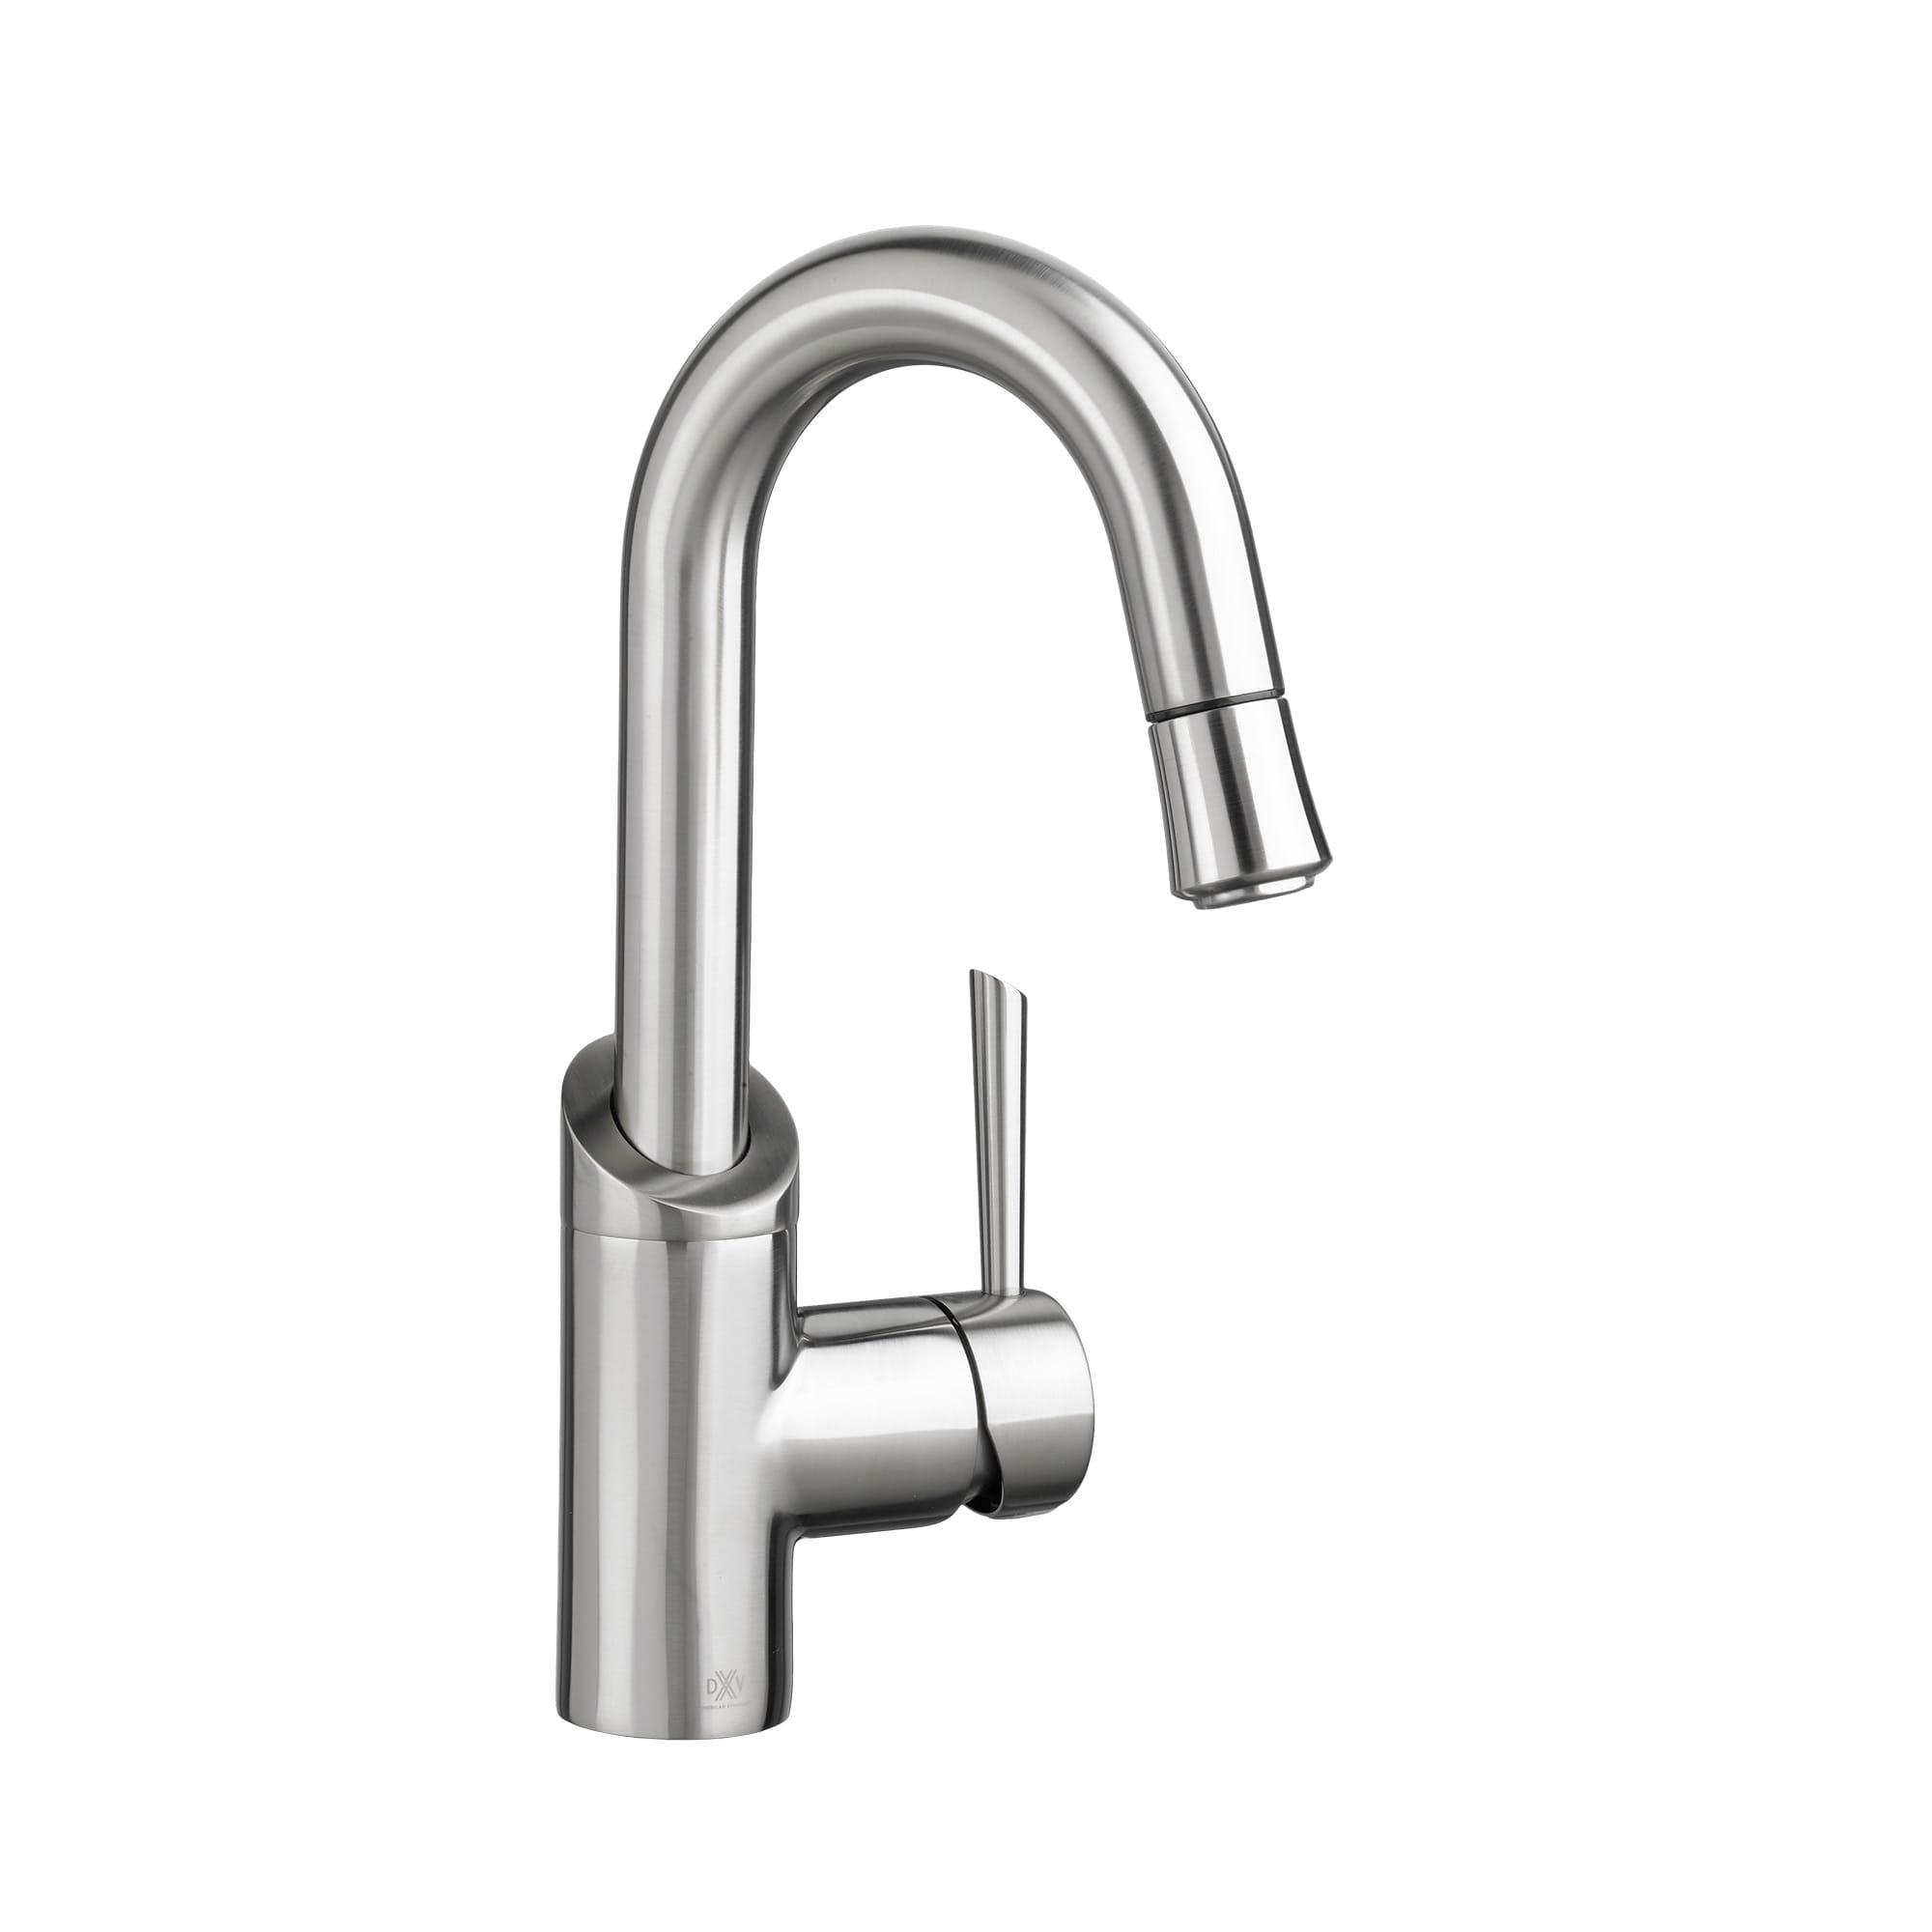 Fresno Single Handle Bar Faucet with Lever Handle